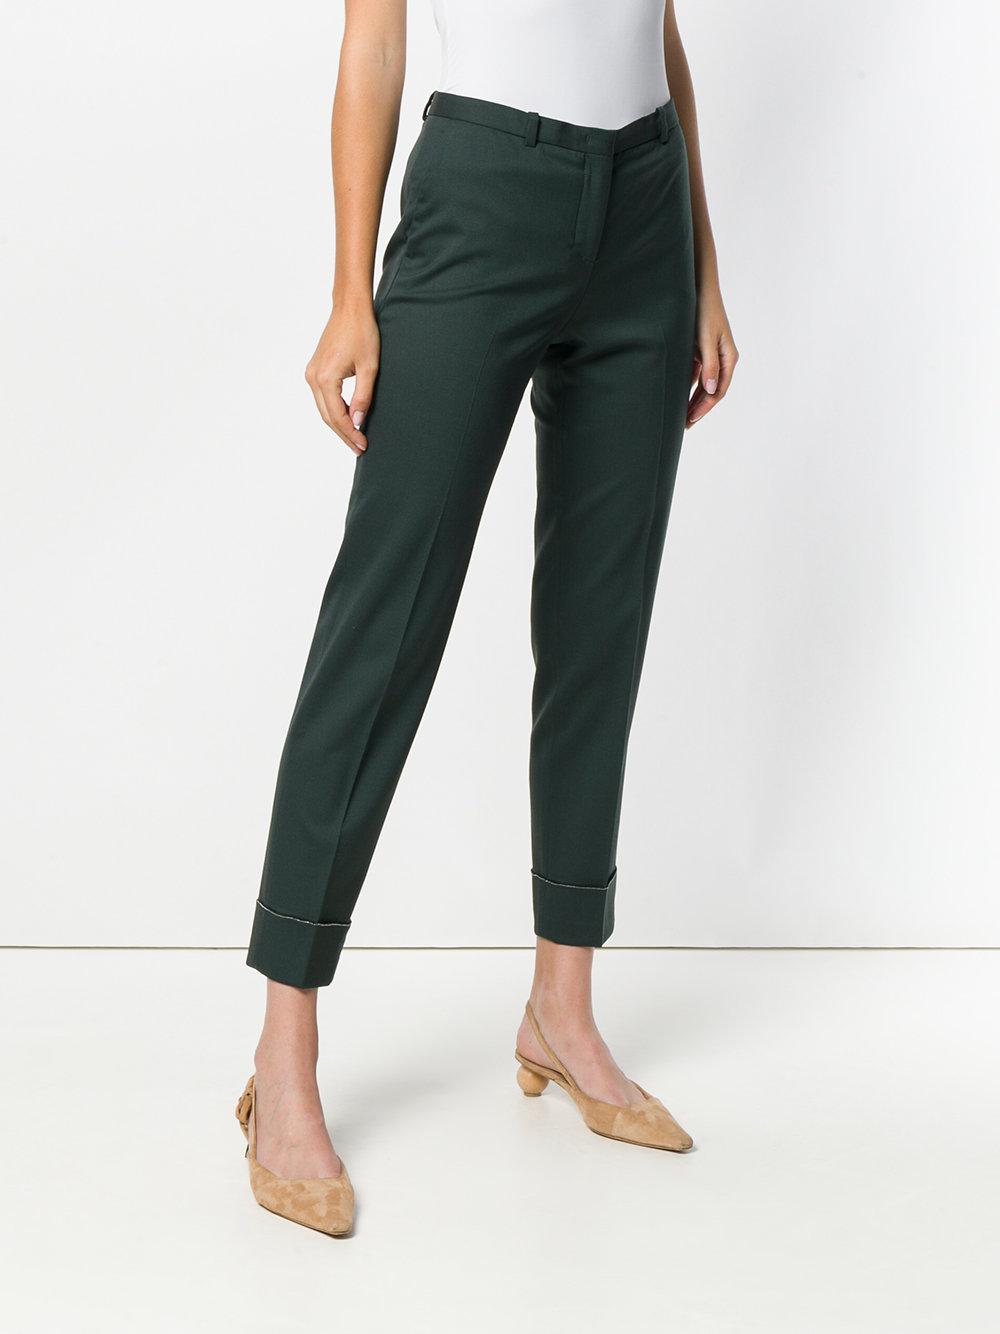 Fabiana Filippi Wool Cropped Tailored Trousers in Green - Lyst